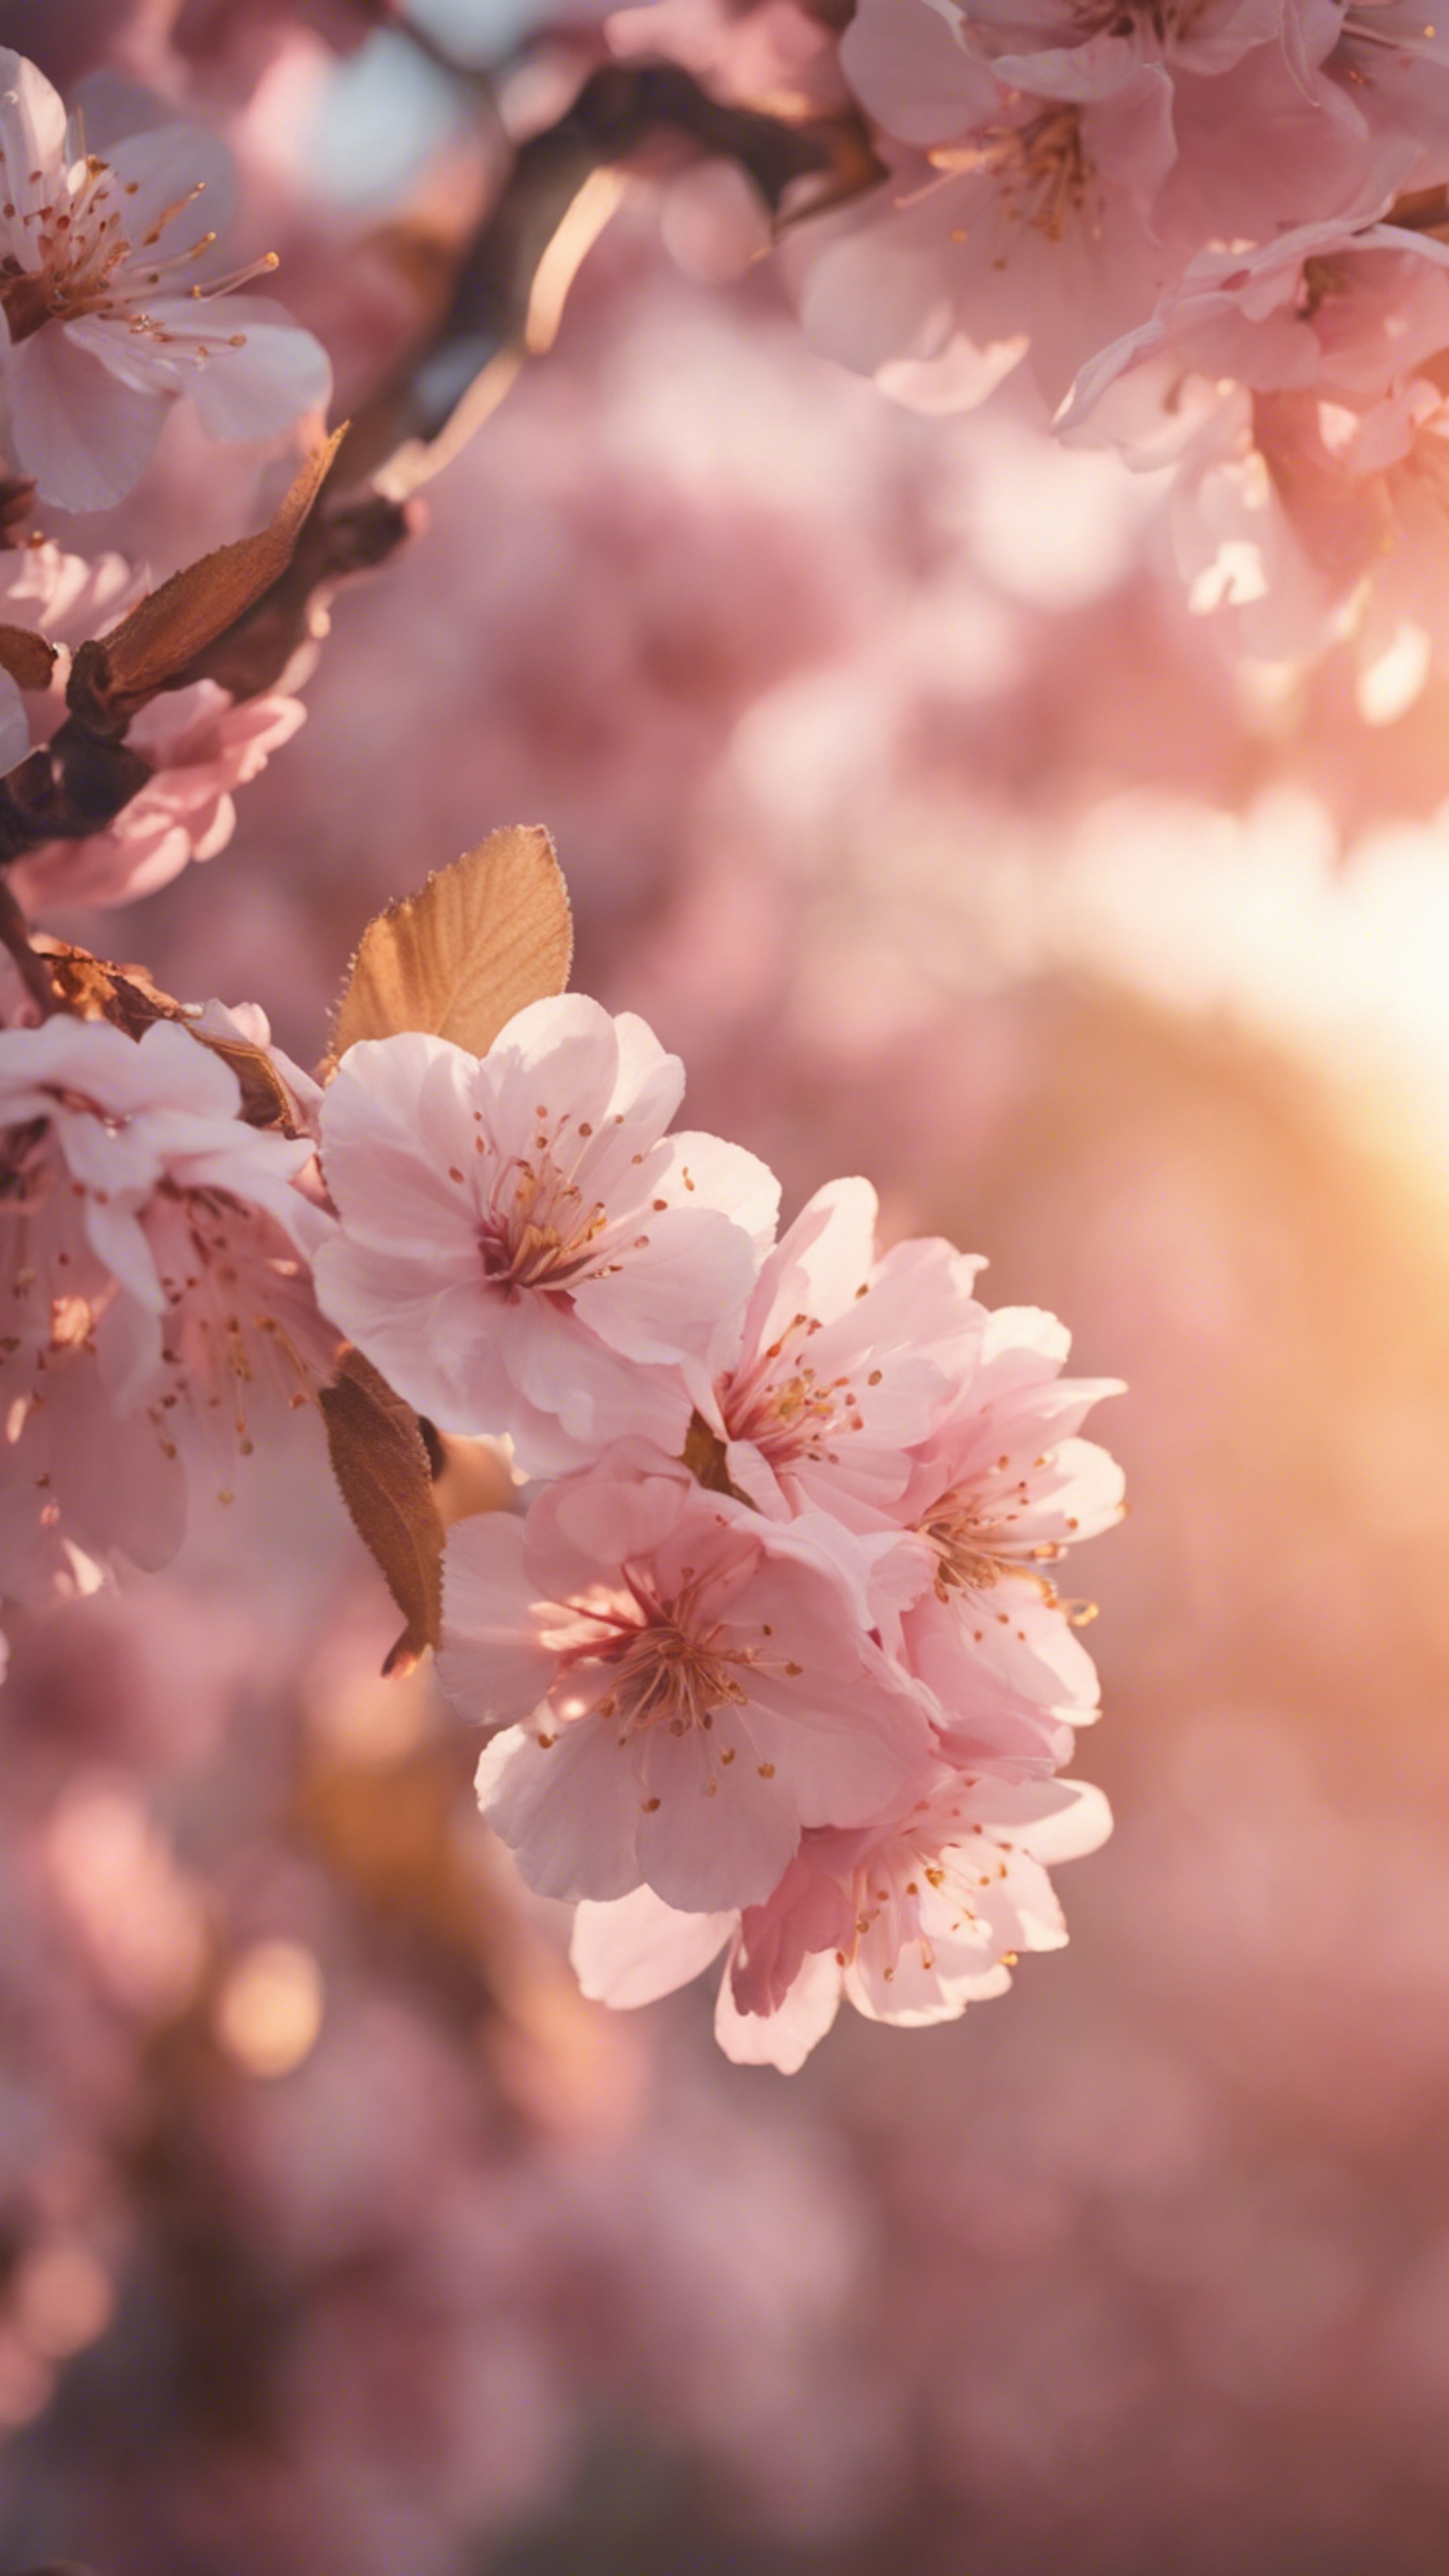 A delicate pink cherry blossom tree with gold leaves against a soft sunset. Tapeta[63878b5c392143fbba4e]